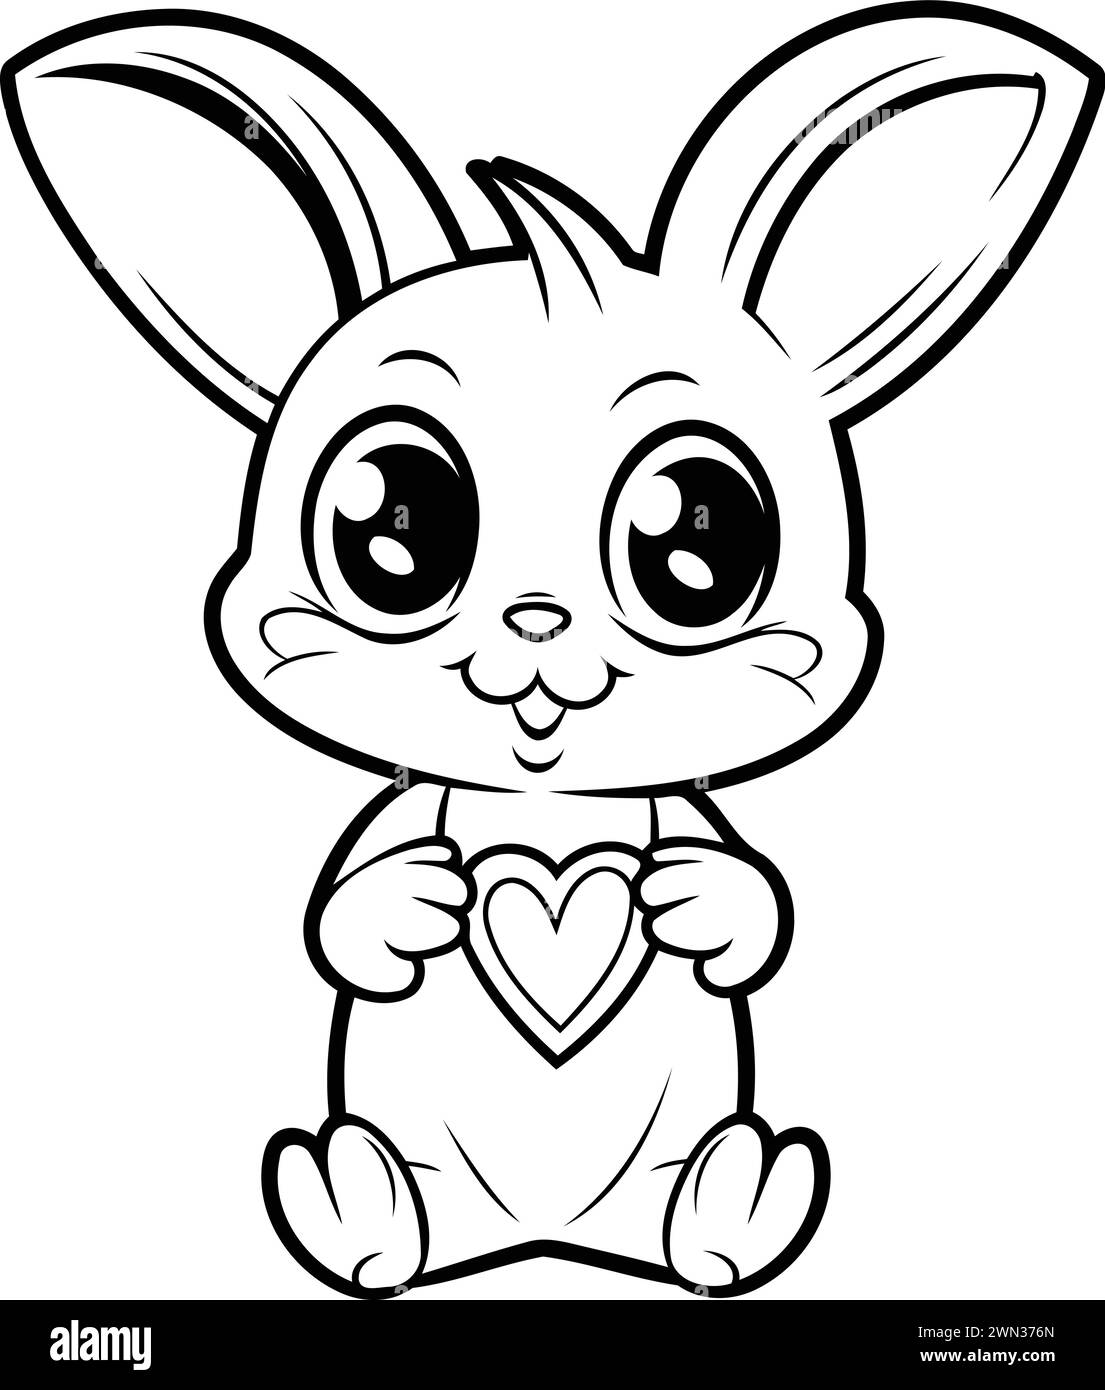 Cute Cartoon Bunny with Heart - Black and White Illustration. Vector Stock Vector